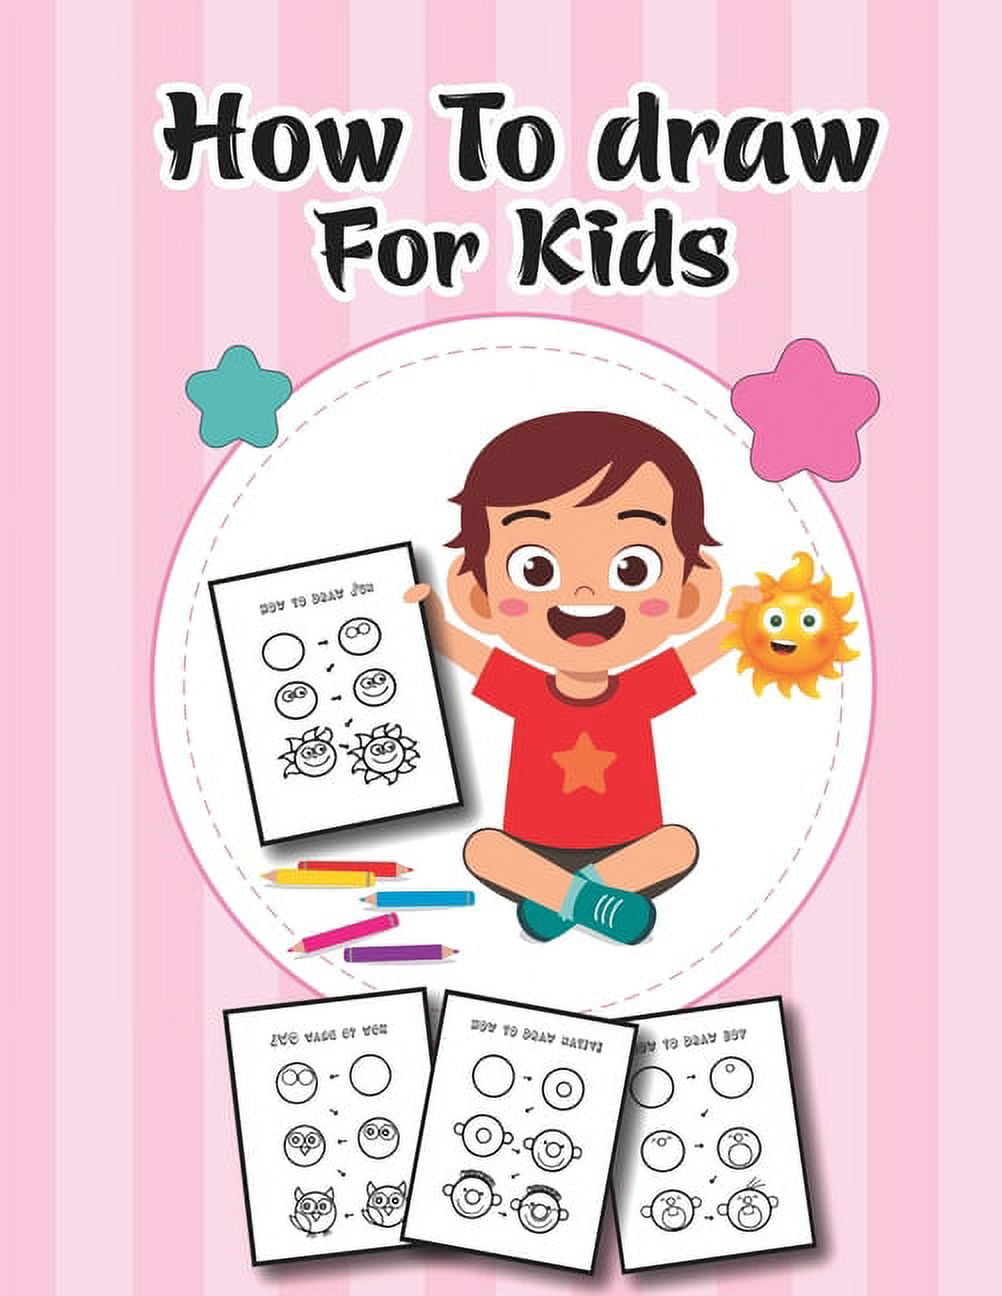 The How To Draw Book For Kids : My First Drawing Book for Your Kids A  Perfect Shape and Tracing game Activity Book for Toddler (Paperback)